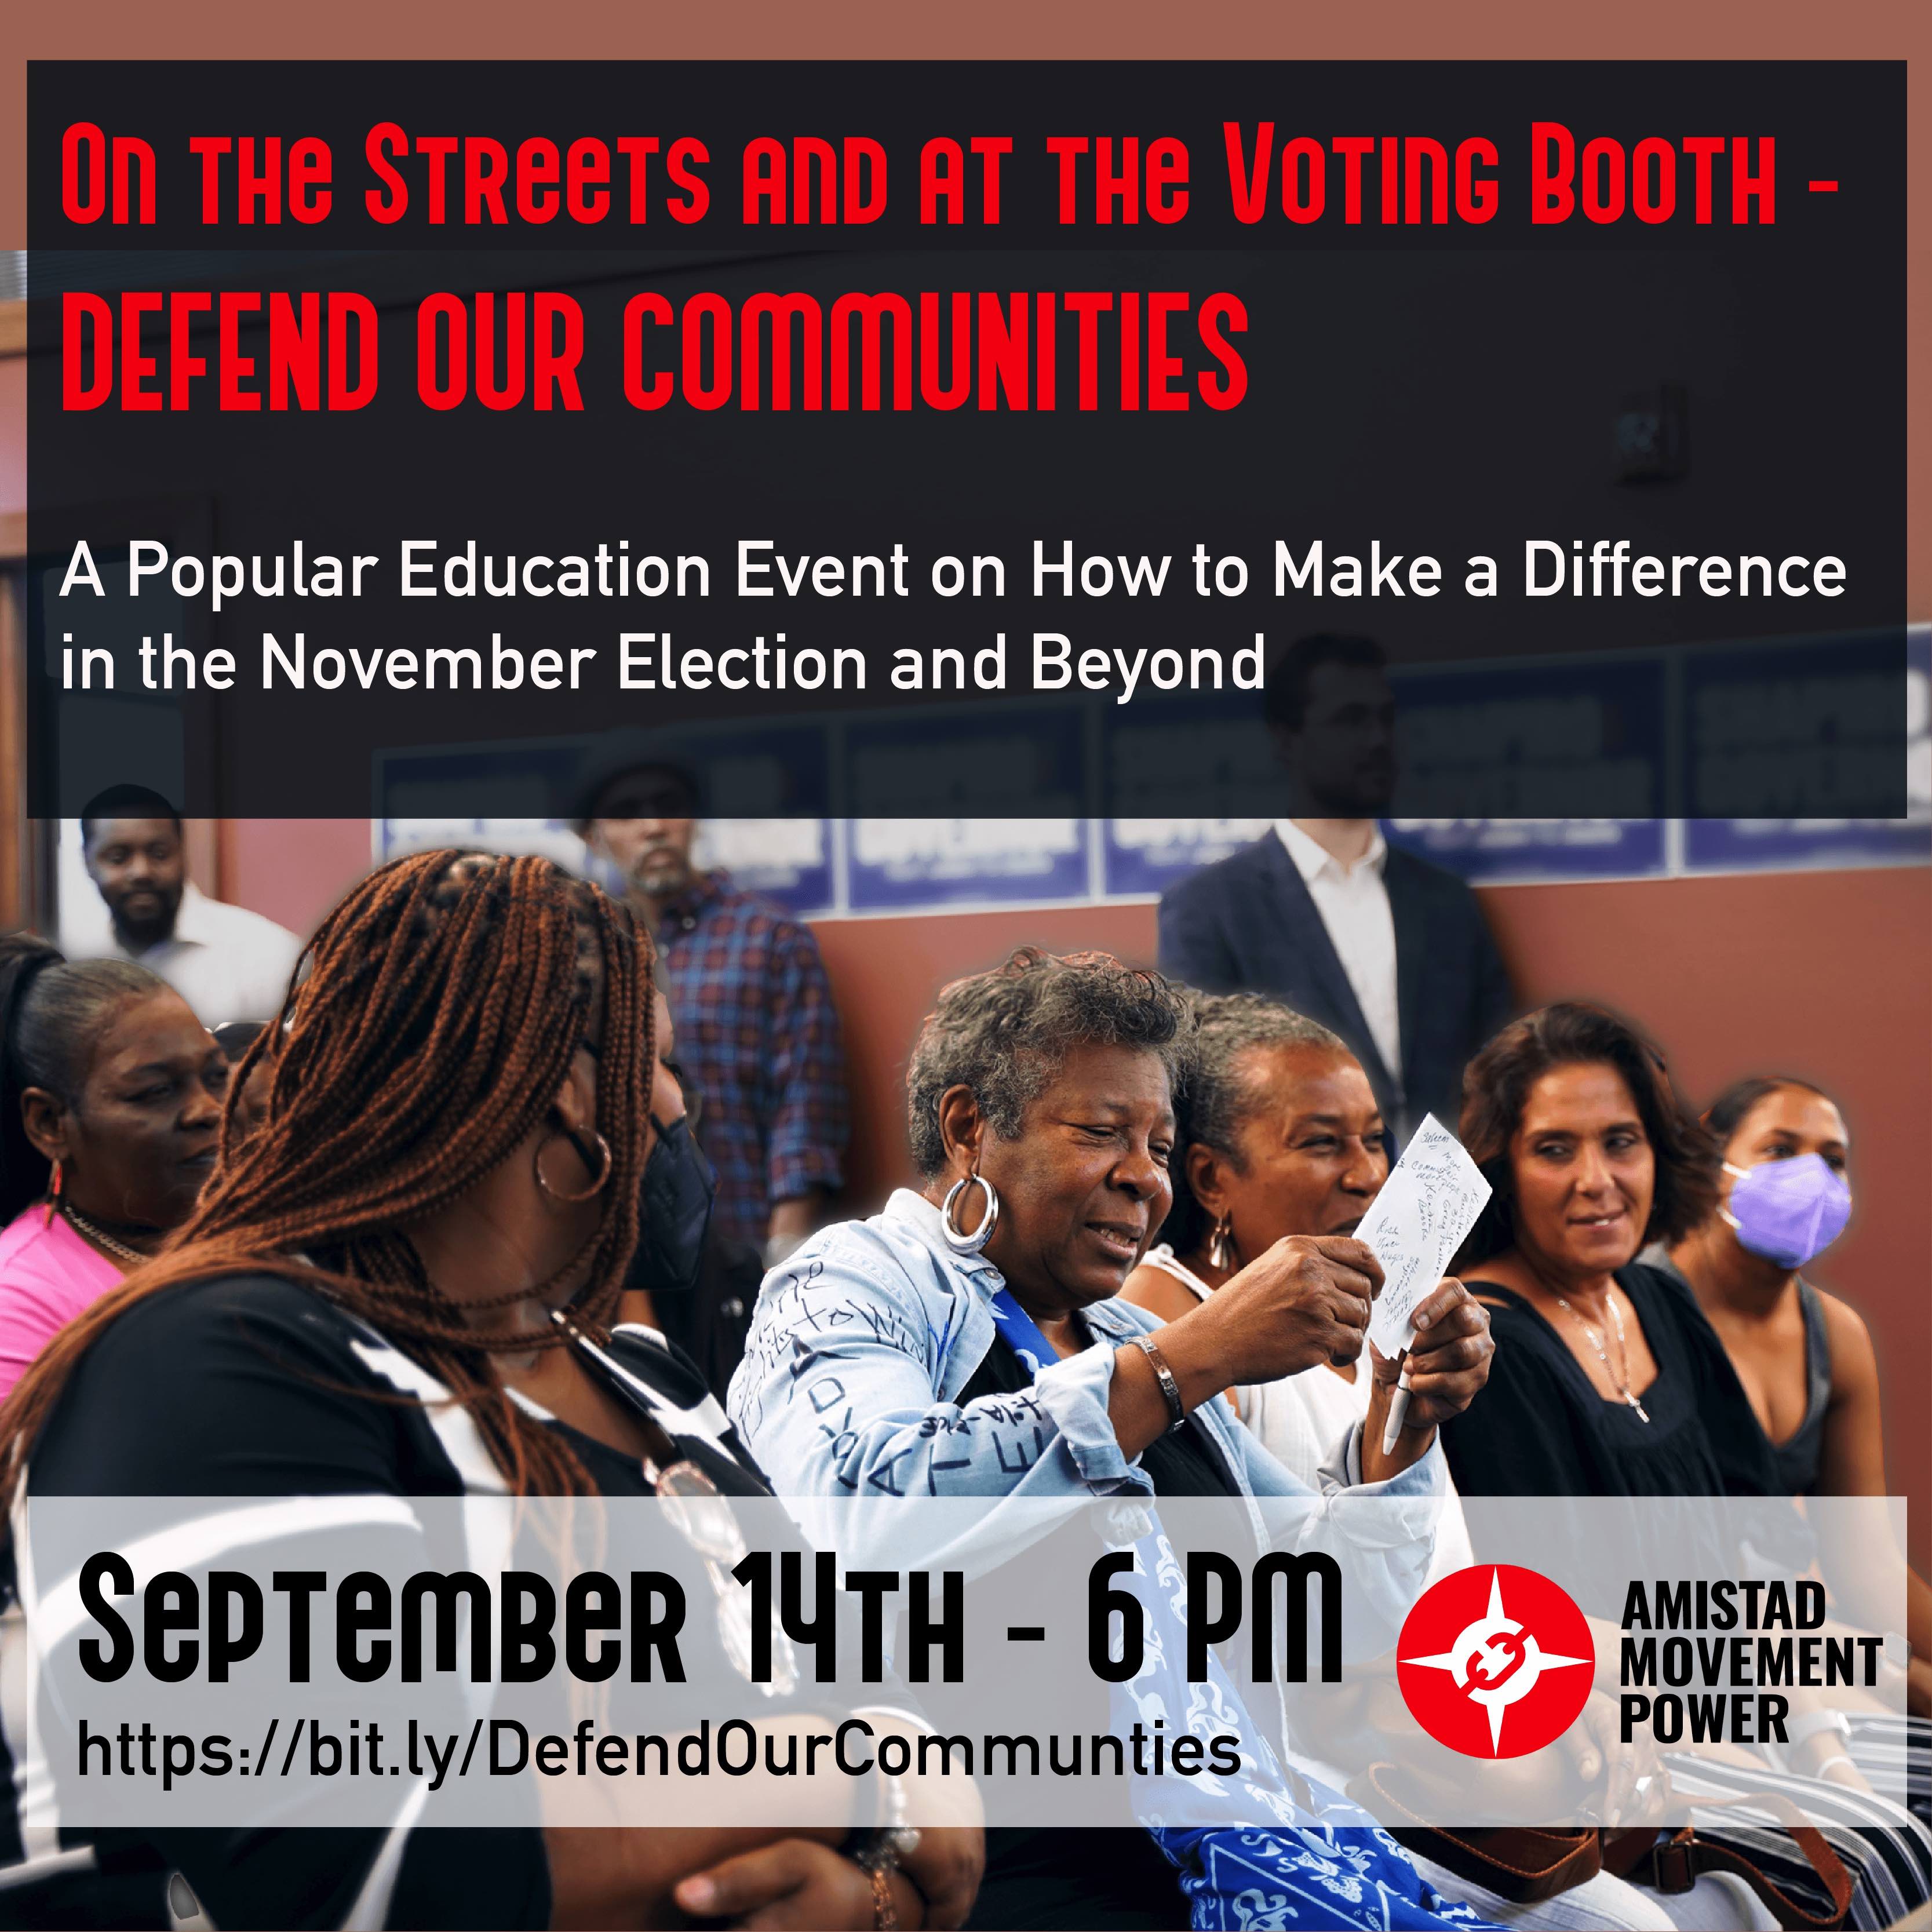 an aimage shows a group of community members with the text 'On the Streets, At the Voting Booth - Defend Our Communities'